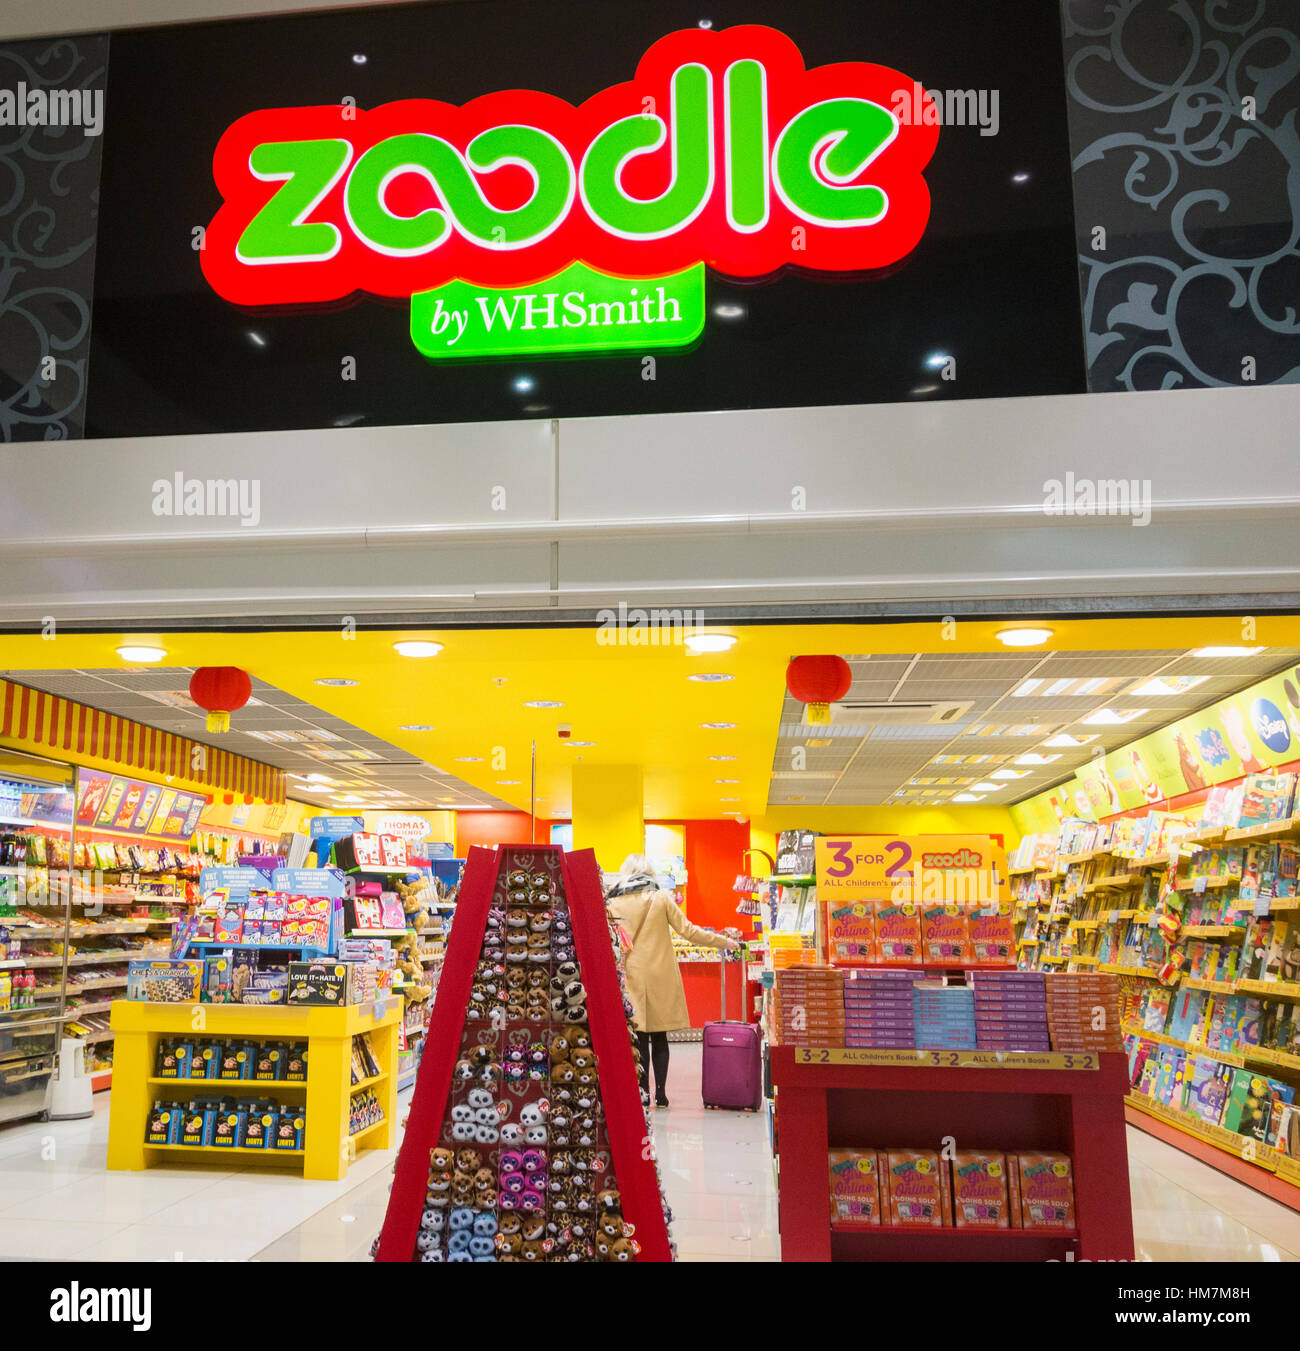 Zoodle shop in Manchester Airport duty free shopping zona. Regno Unito Foto Stock